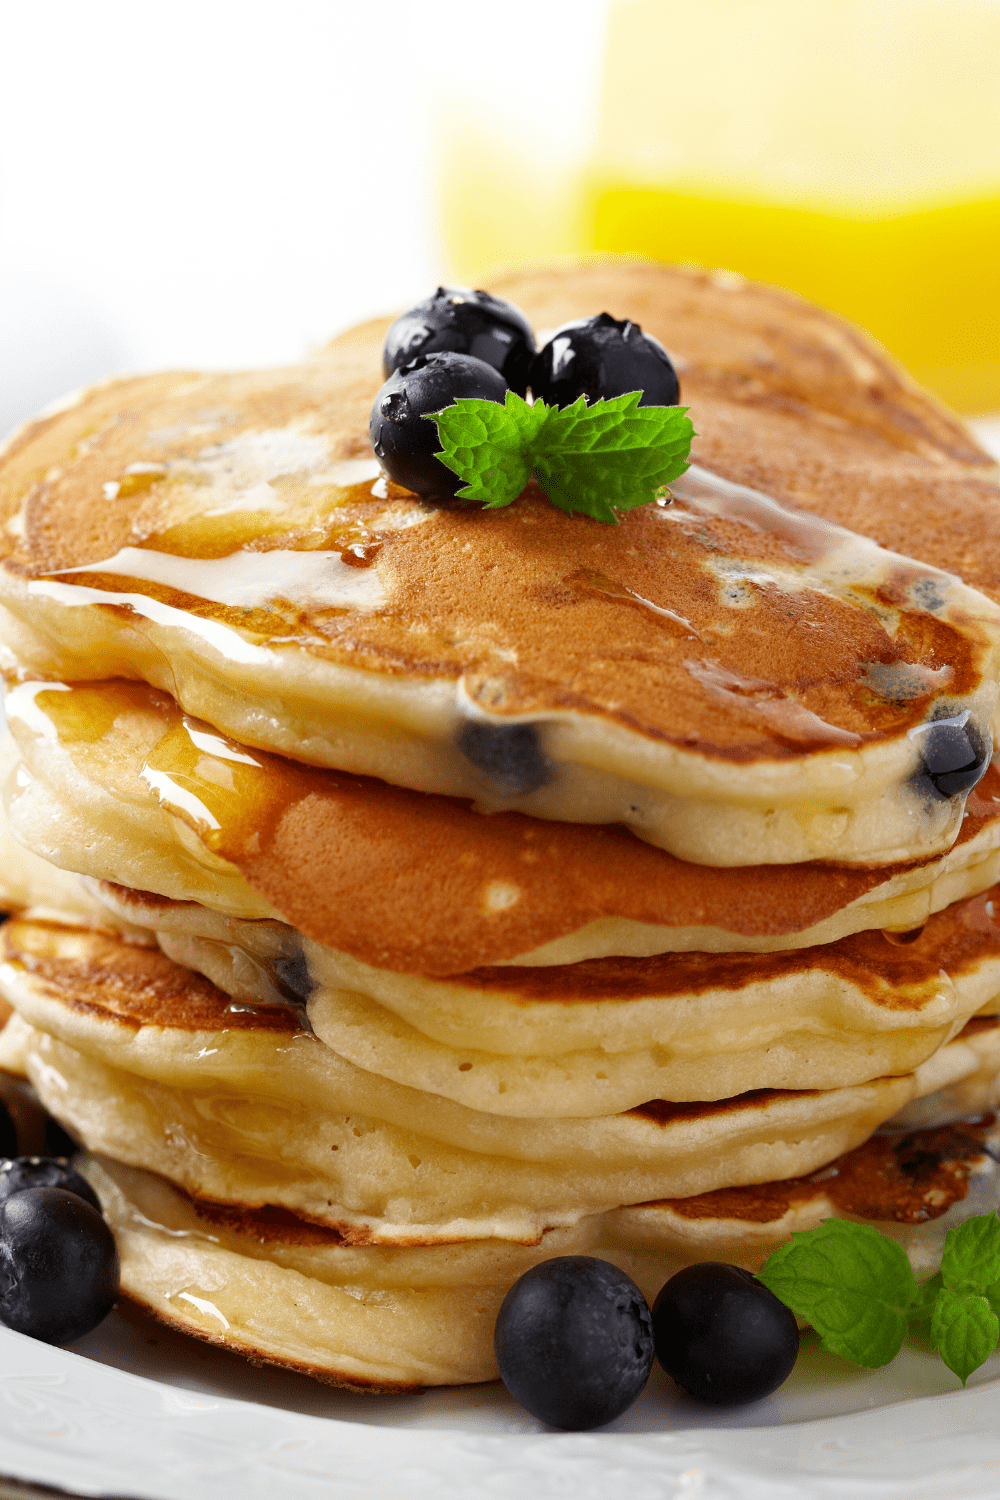 Stacks of Pancakes with Blueberries